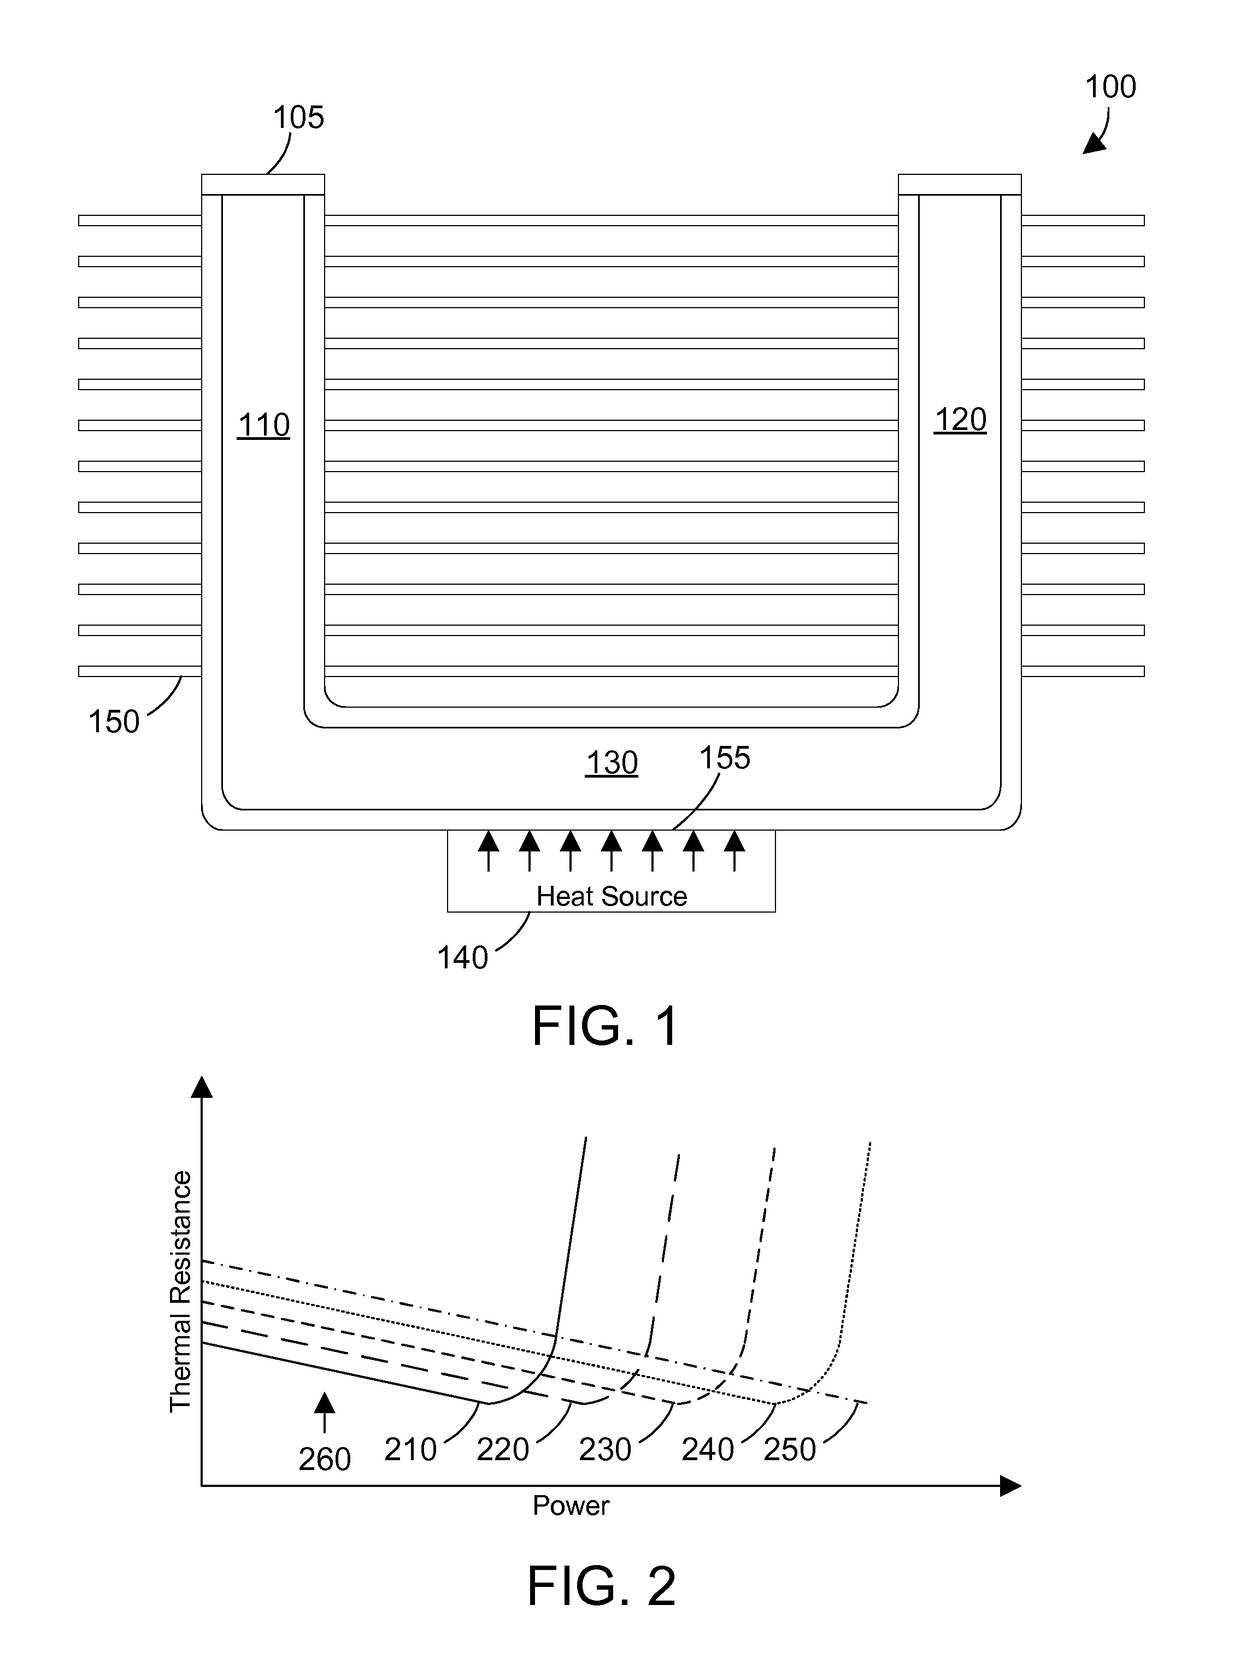 Demand-based charging of a heat pipe